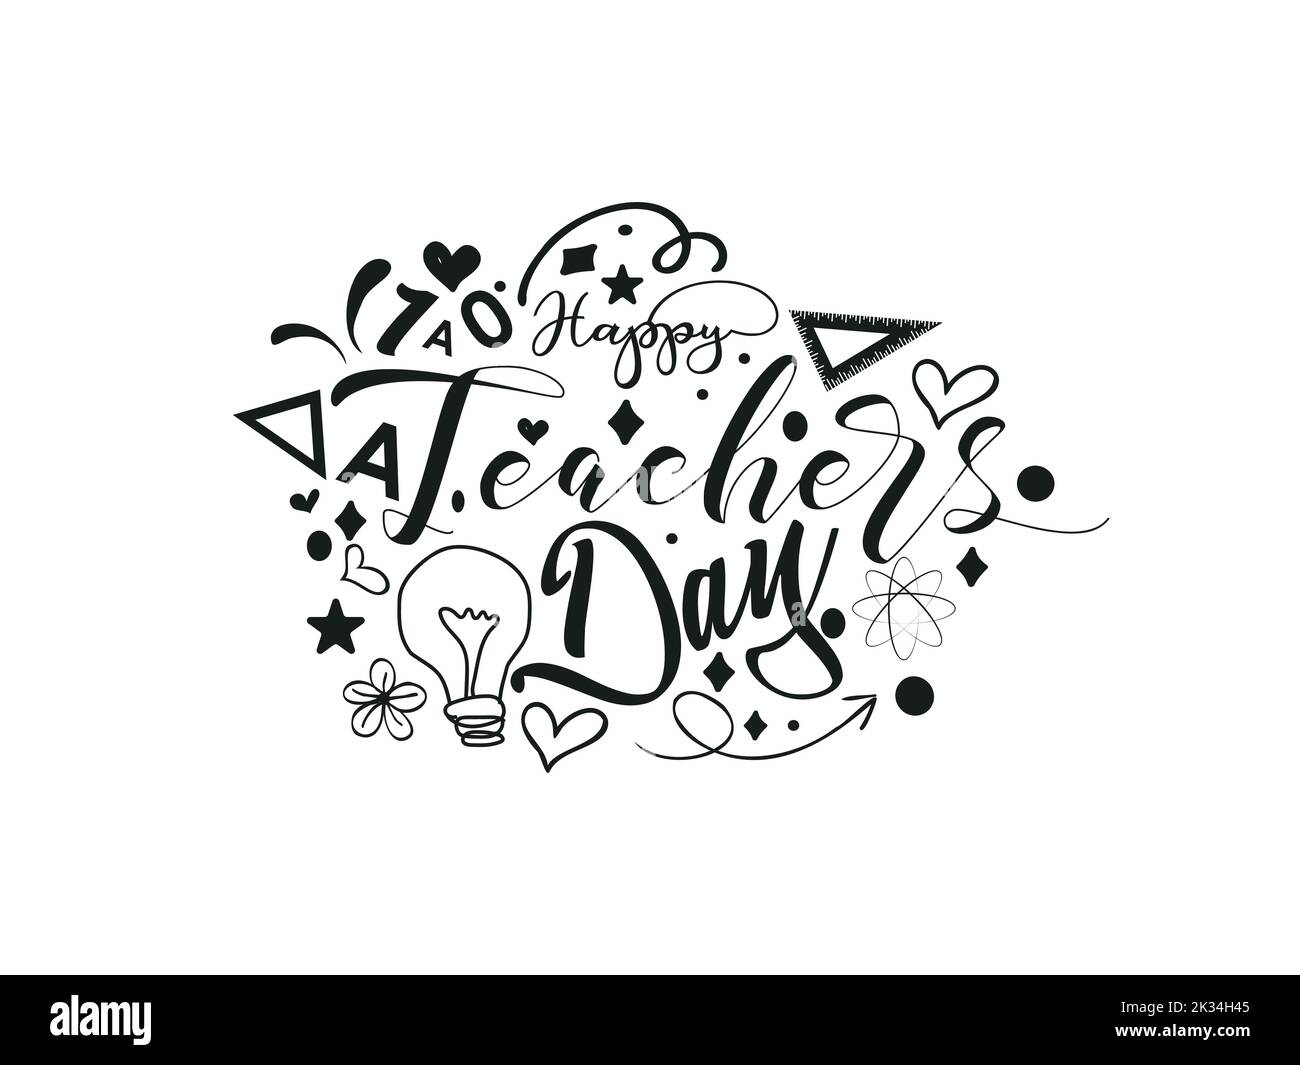 Creative hand lettering vector illustration design concept for happy teachers day with decorative doodle celebration Stock Vector